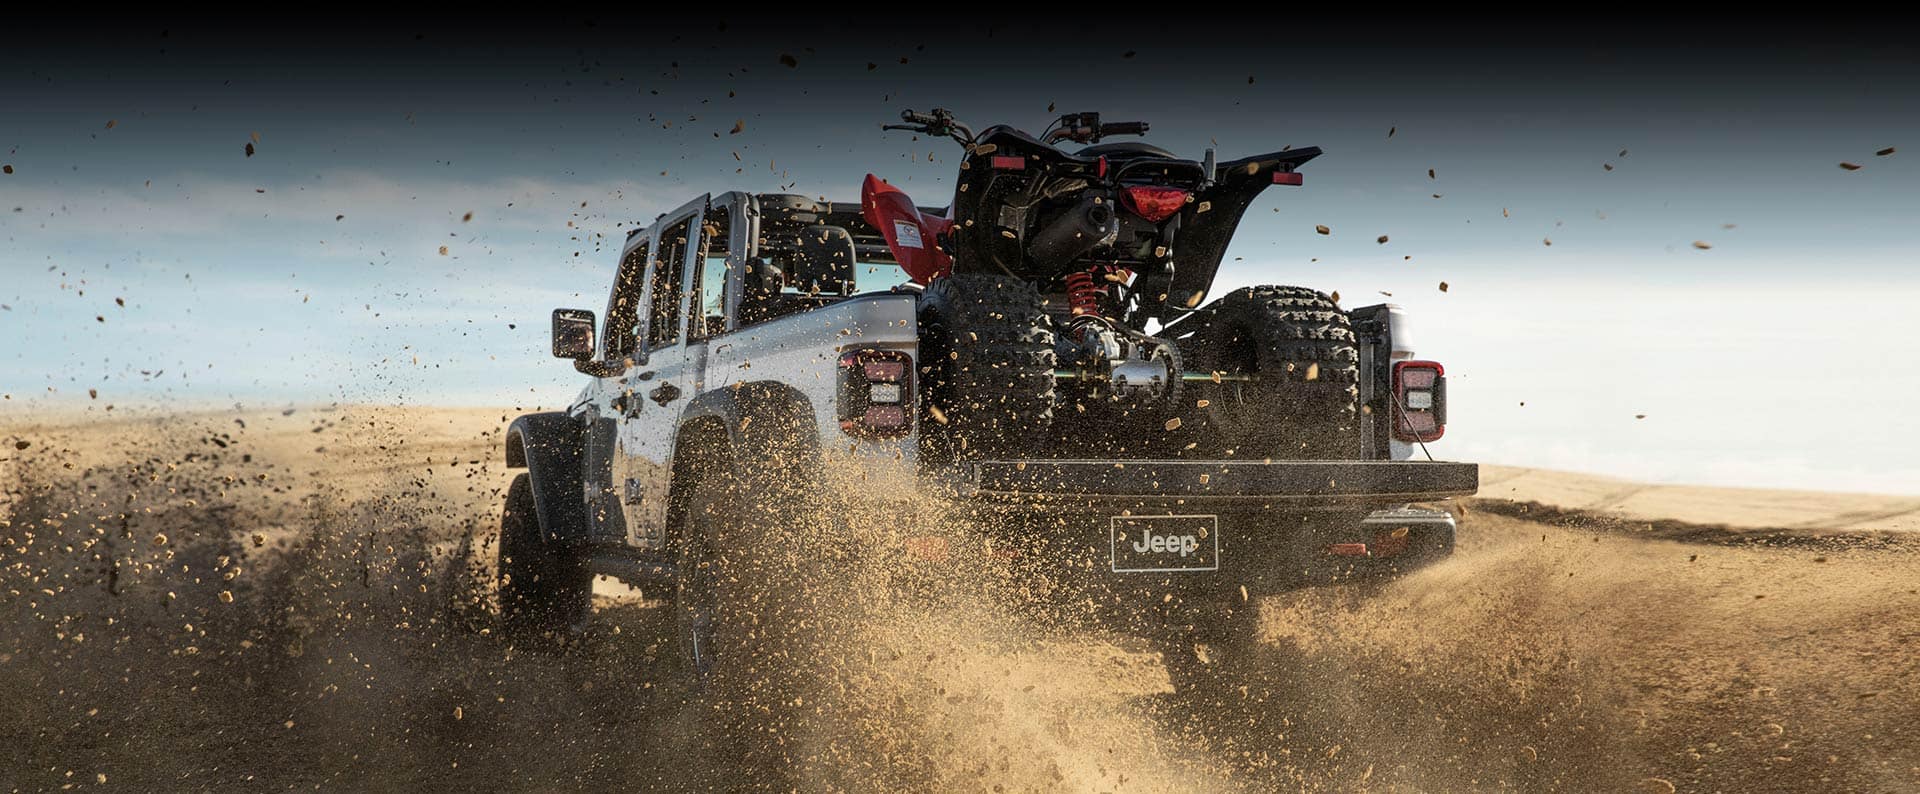 The rear view of a 2023 Jeep Gladiator Rubicon kicking up sand as it is driven across a desert, carrying an ATV in its bed with the tailgate open.